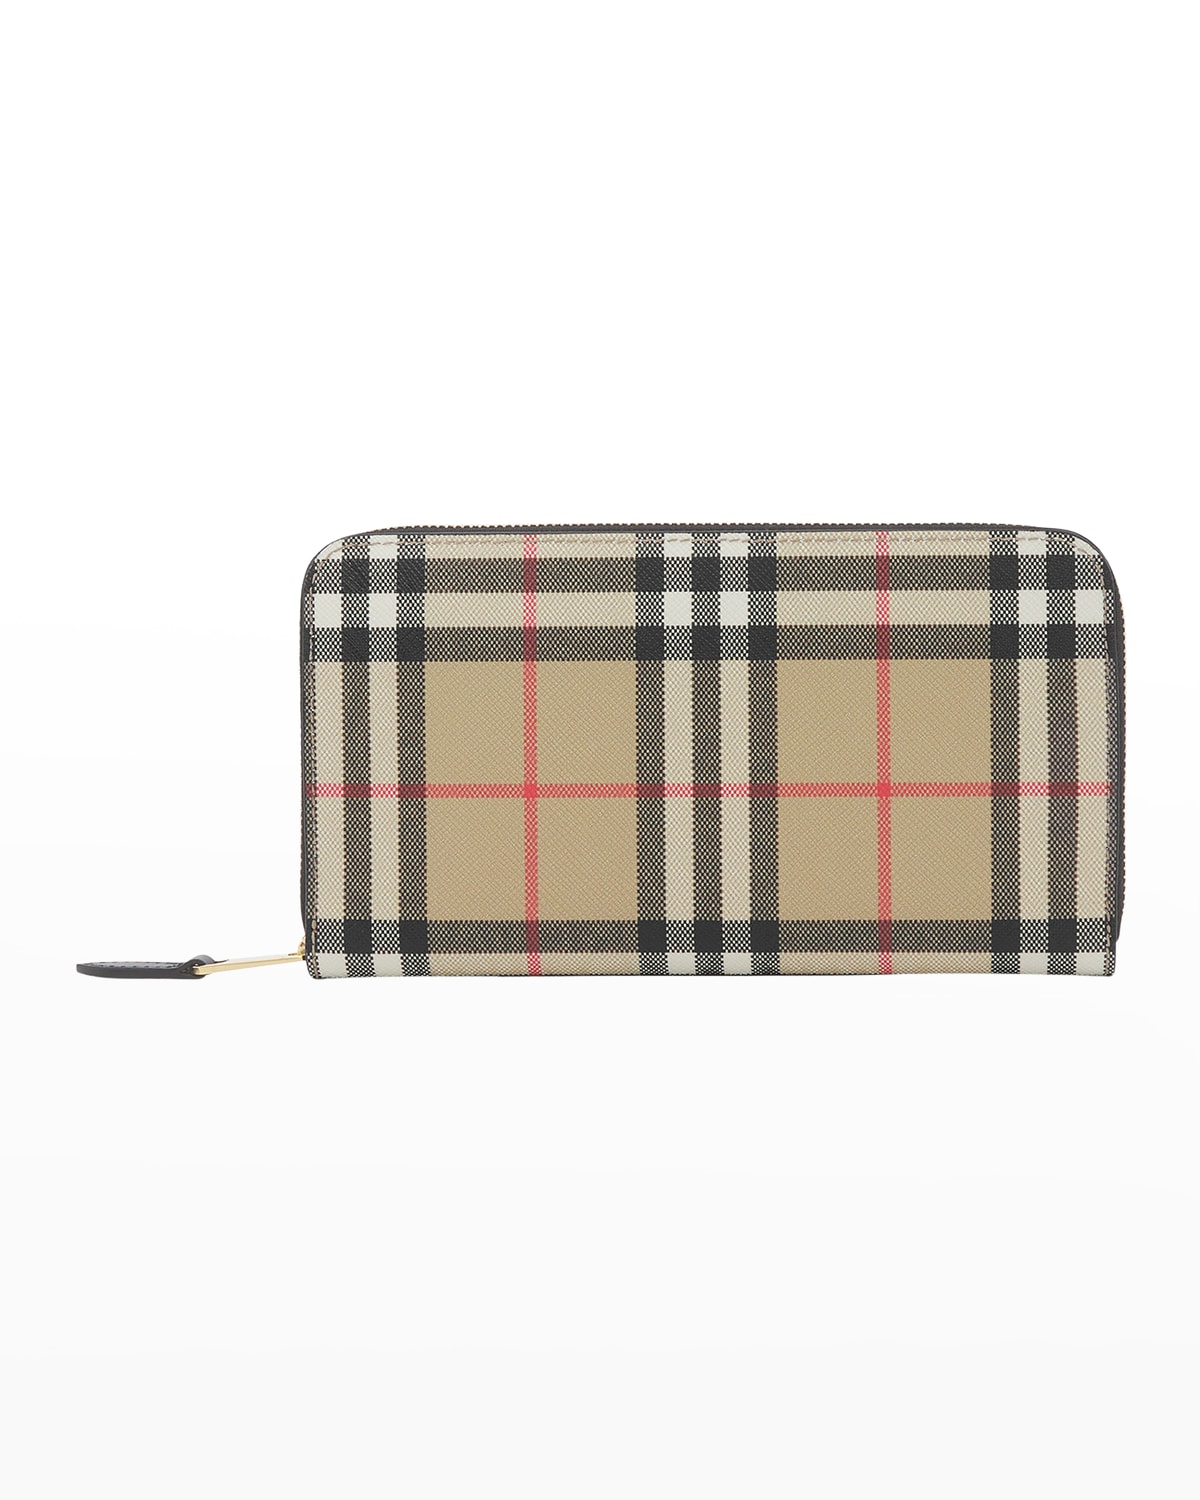 Elmore Vintage Check And Leather Ziparound Wallet In Beige Multi